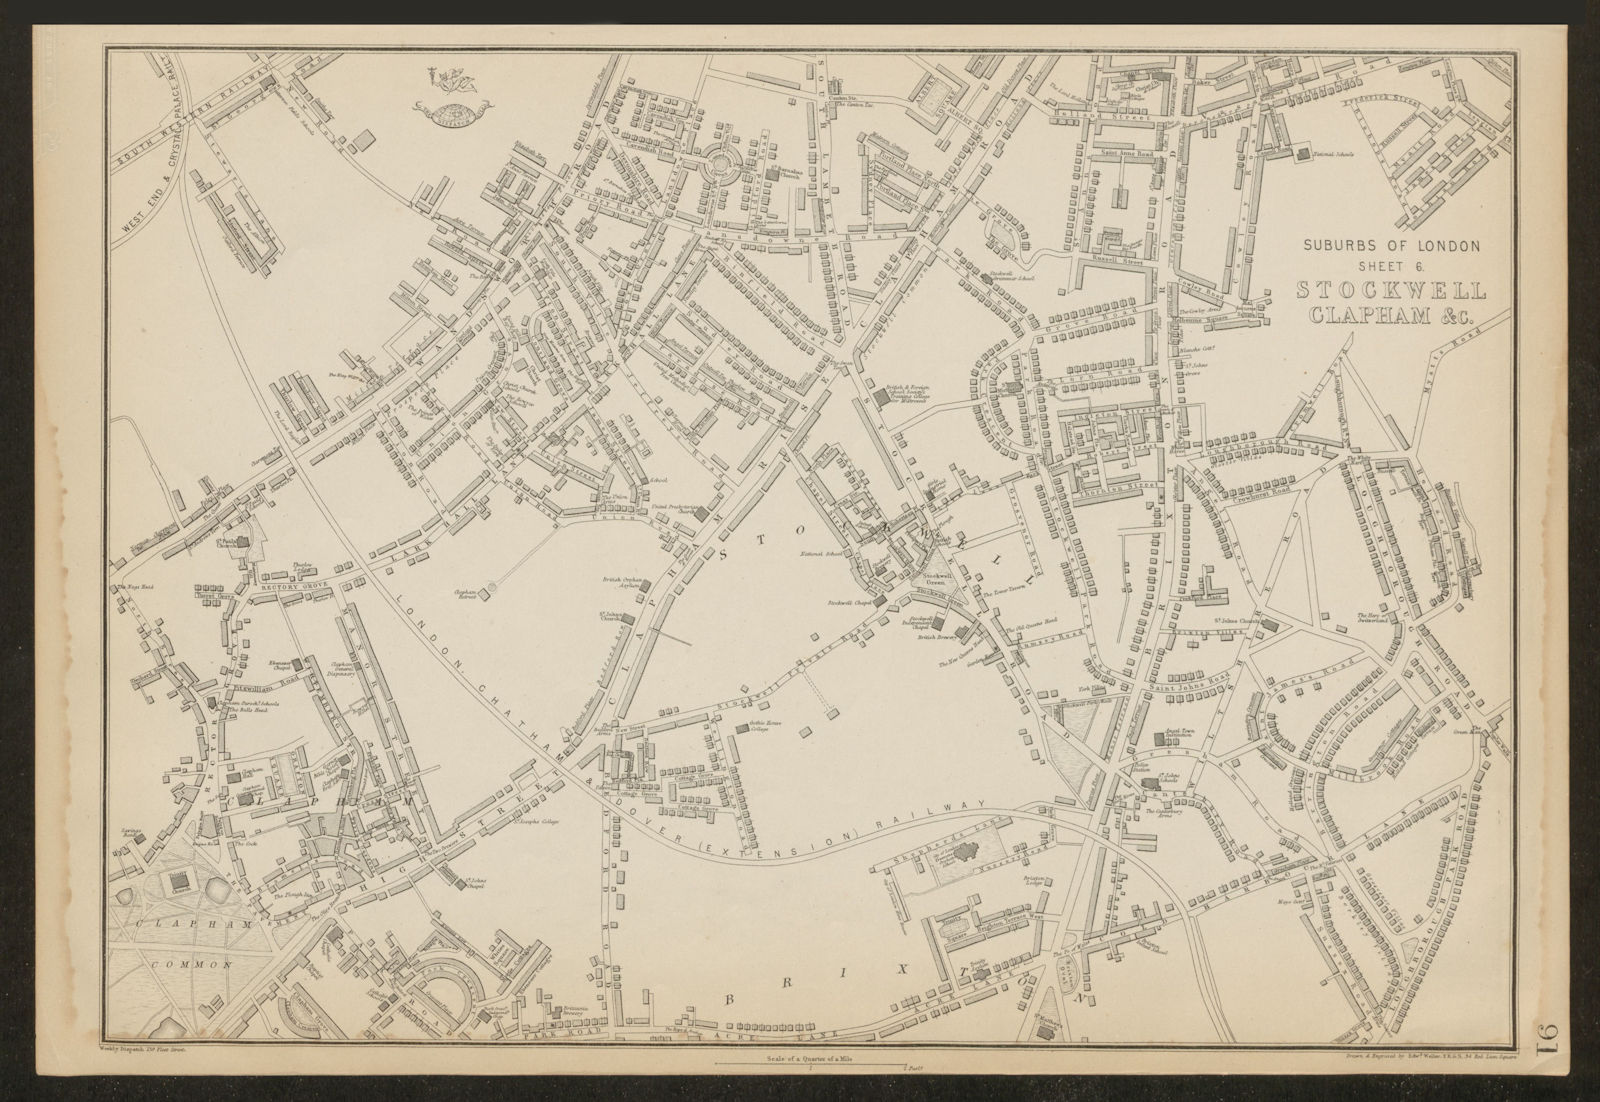 SOUTH LONDON. Stockwell Clapham North/Common Brixton Battersea. WELLER 1862 map